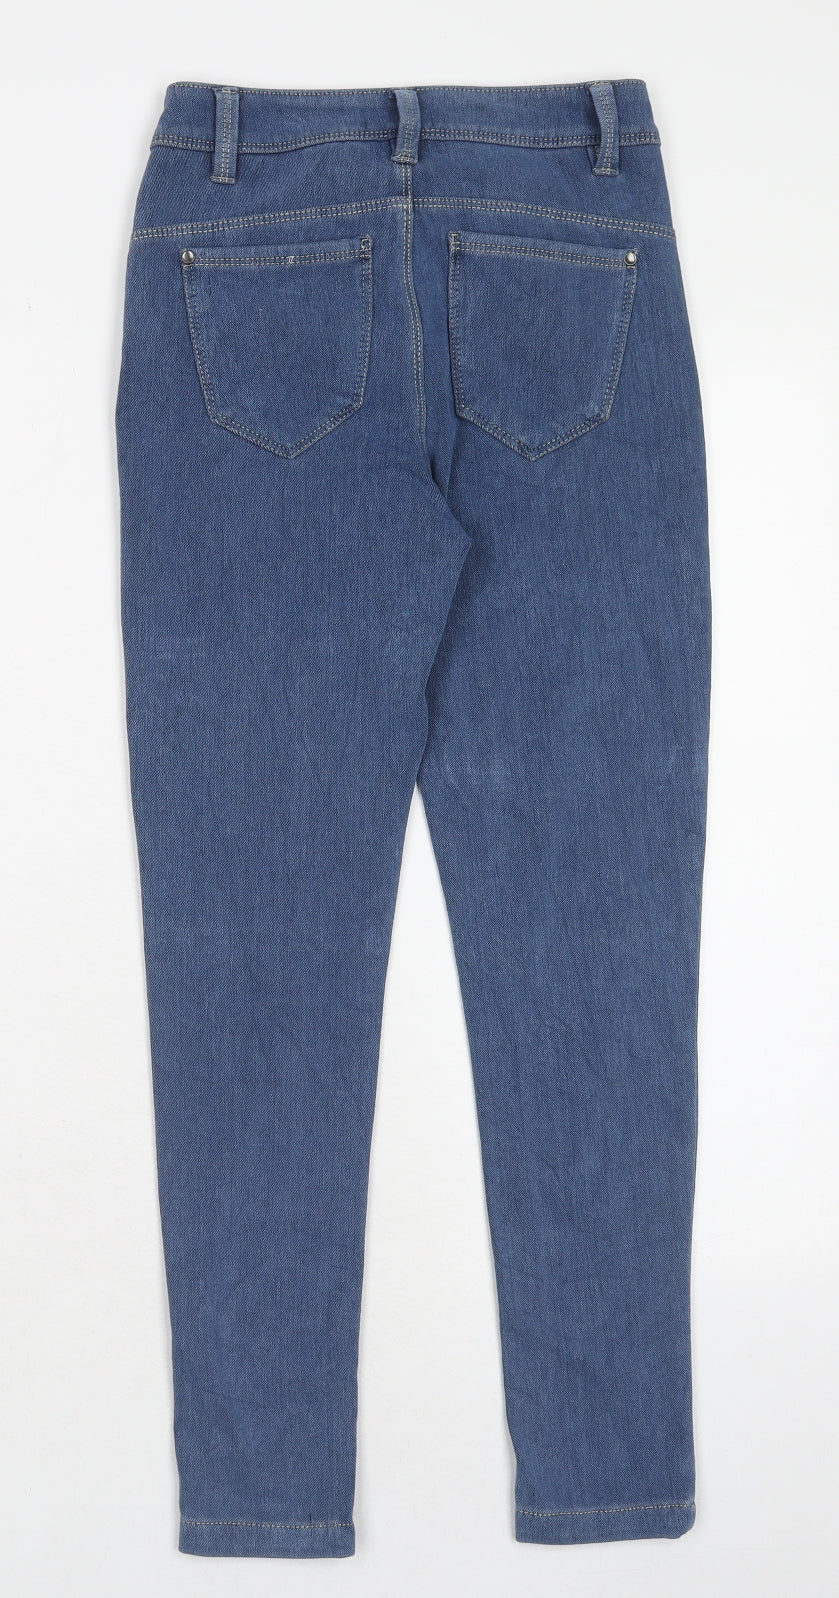 New Look Womens Blue Polyester Skinny Jeans Size 8 Regular Zip